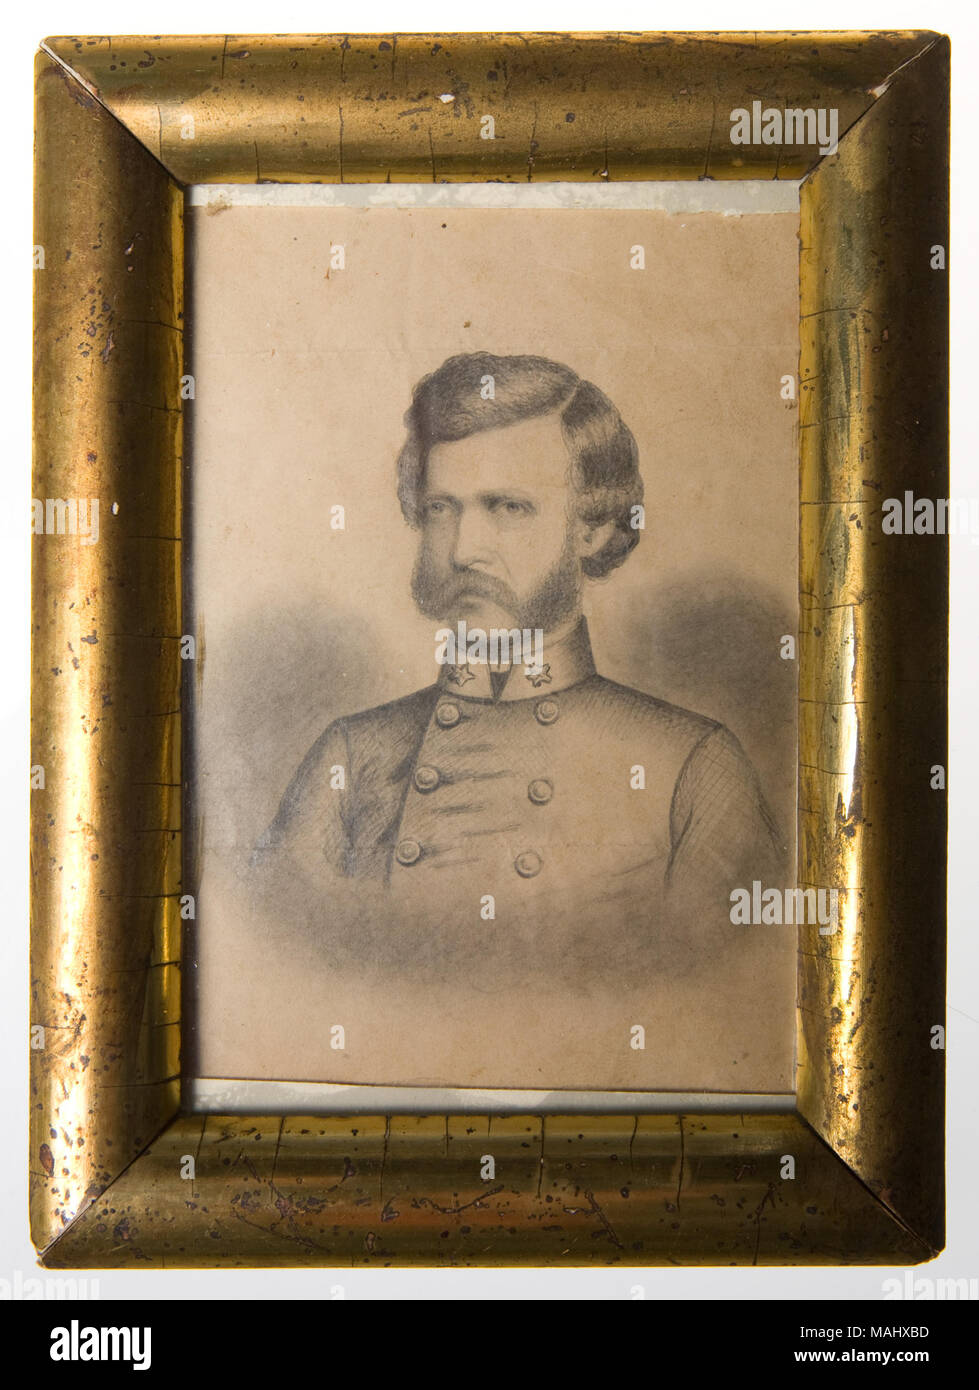 Self-portrait pencil drawing by Major John C. Smith, CSA, completed when he was imprisoned at Johnson's Island, Ohio during the Civil War. Smith drew the image by looking at himself in a piece of tin. Title: Miniature Self Portrait of John C. Smith  . 1863. John C. Smith Stock Photo